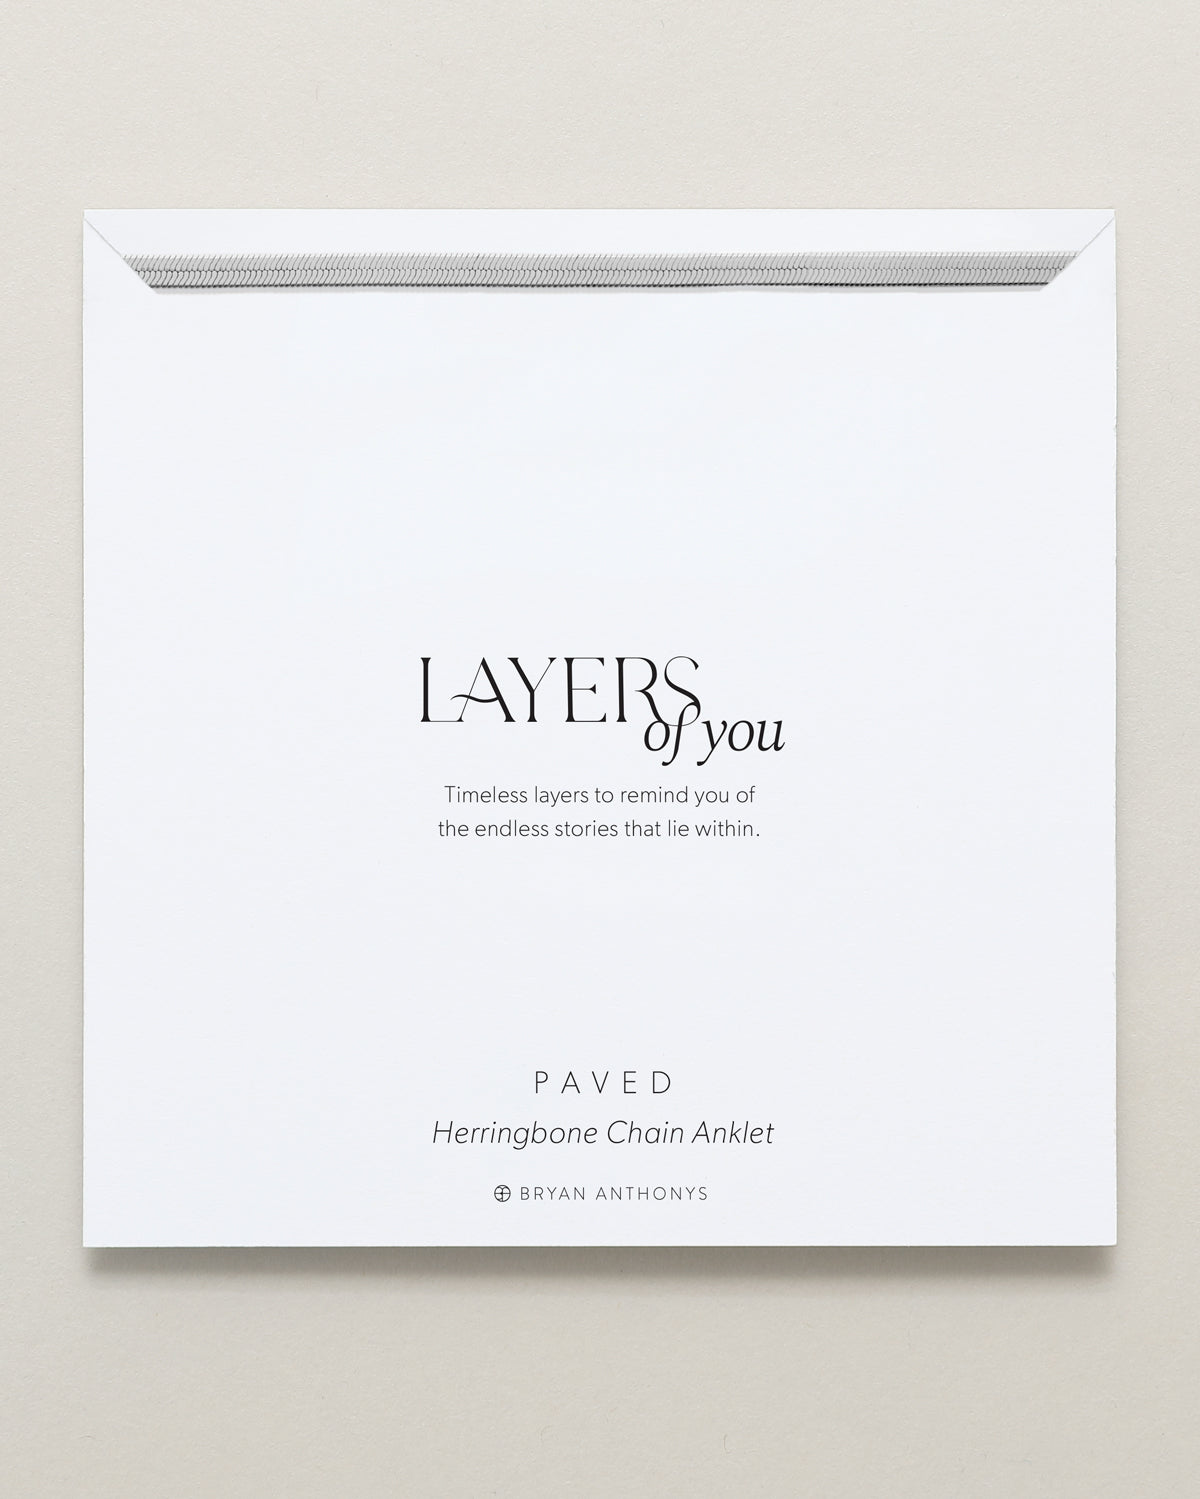 Bryan Anthonys Layers of You Paved Silver Herringbone Chain Anklet On Card